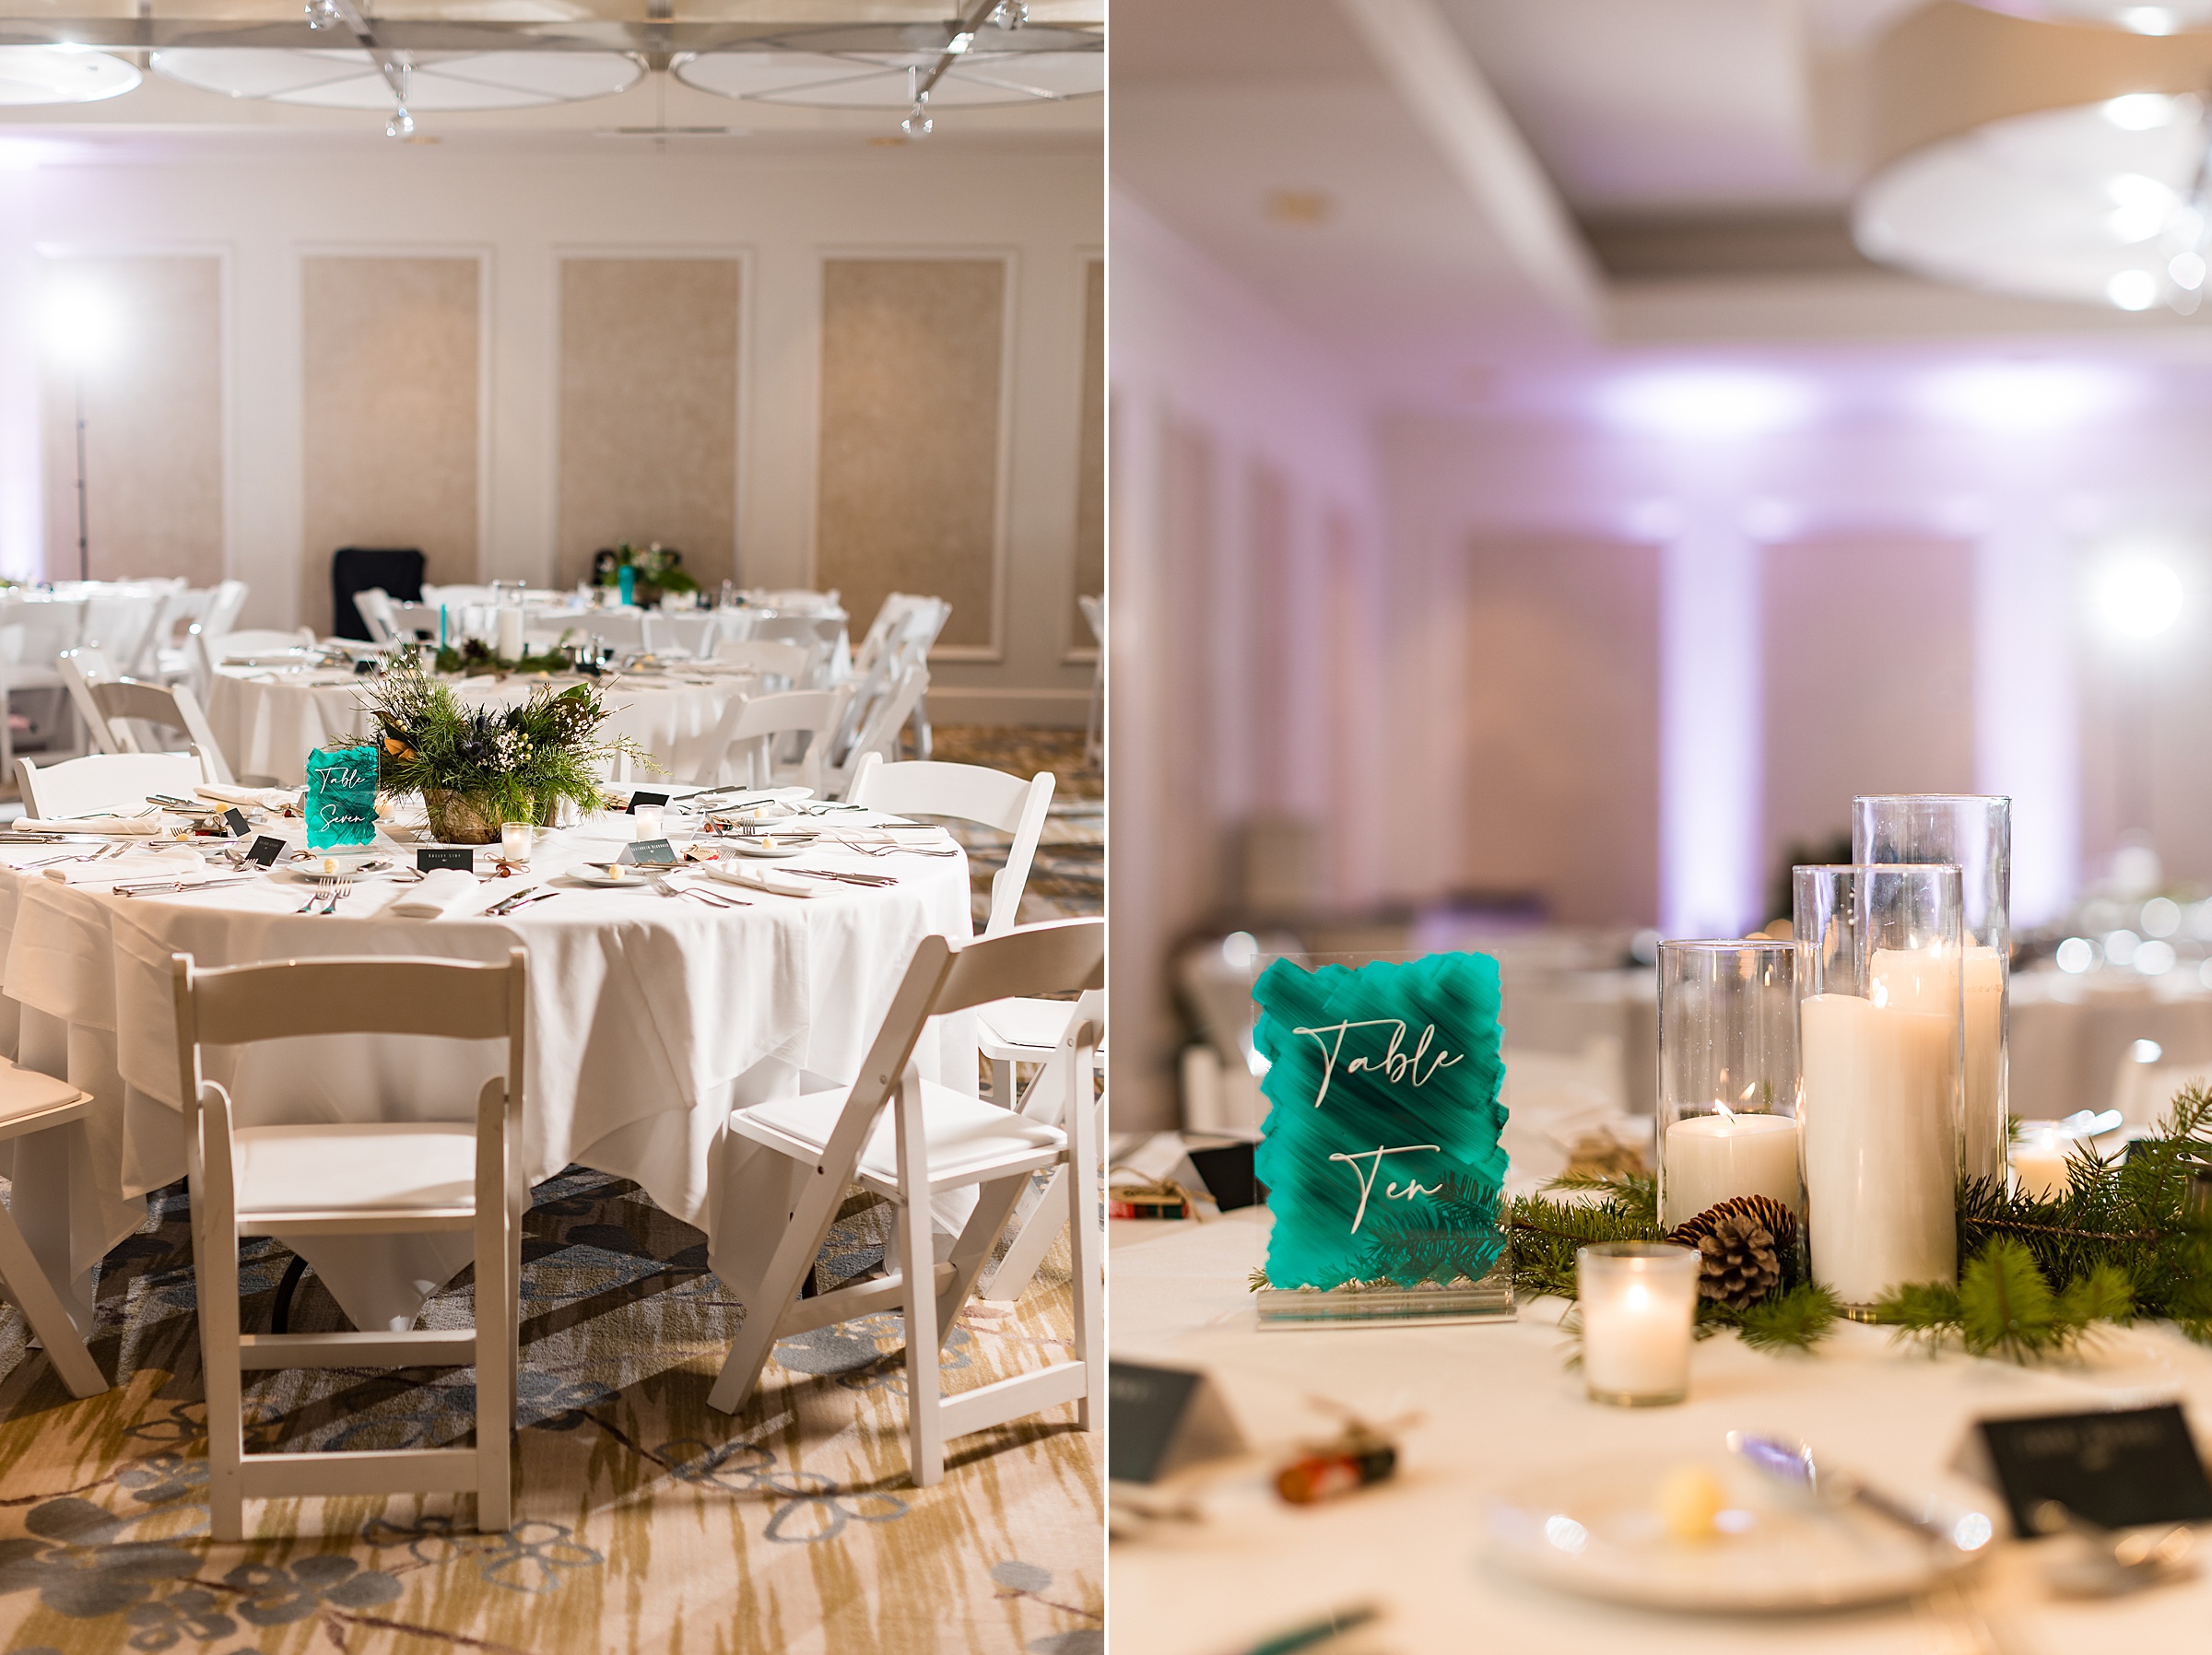 Detailed photos of the table settings for the reception at the H Hotel by Detroit Wedding Photographer Michele Maloney 